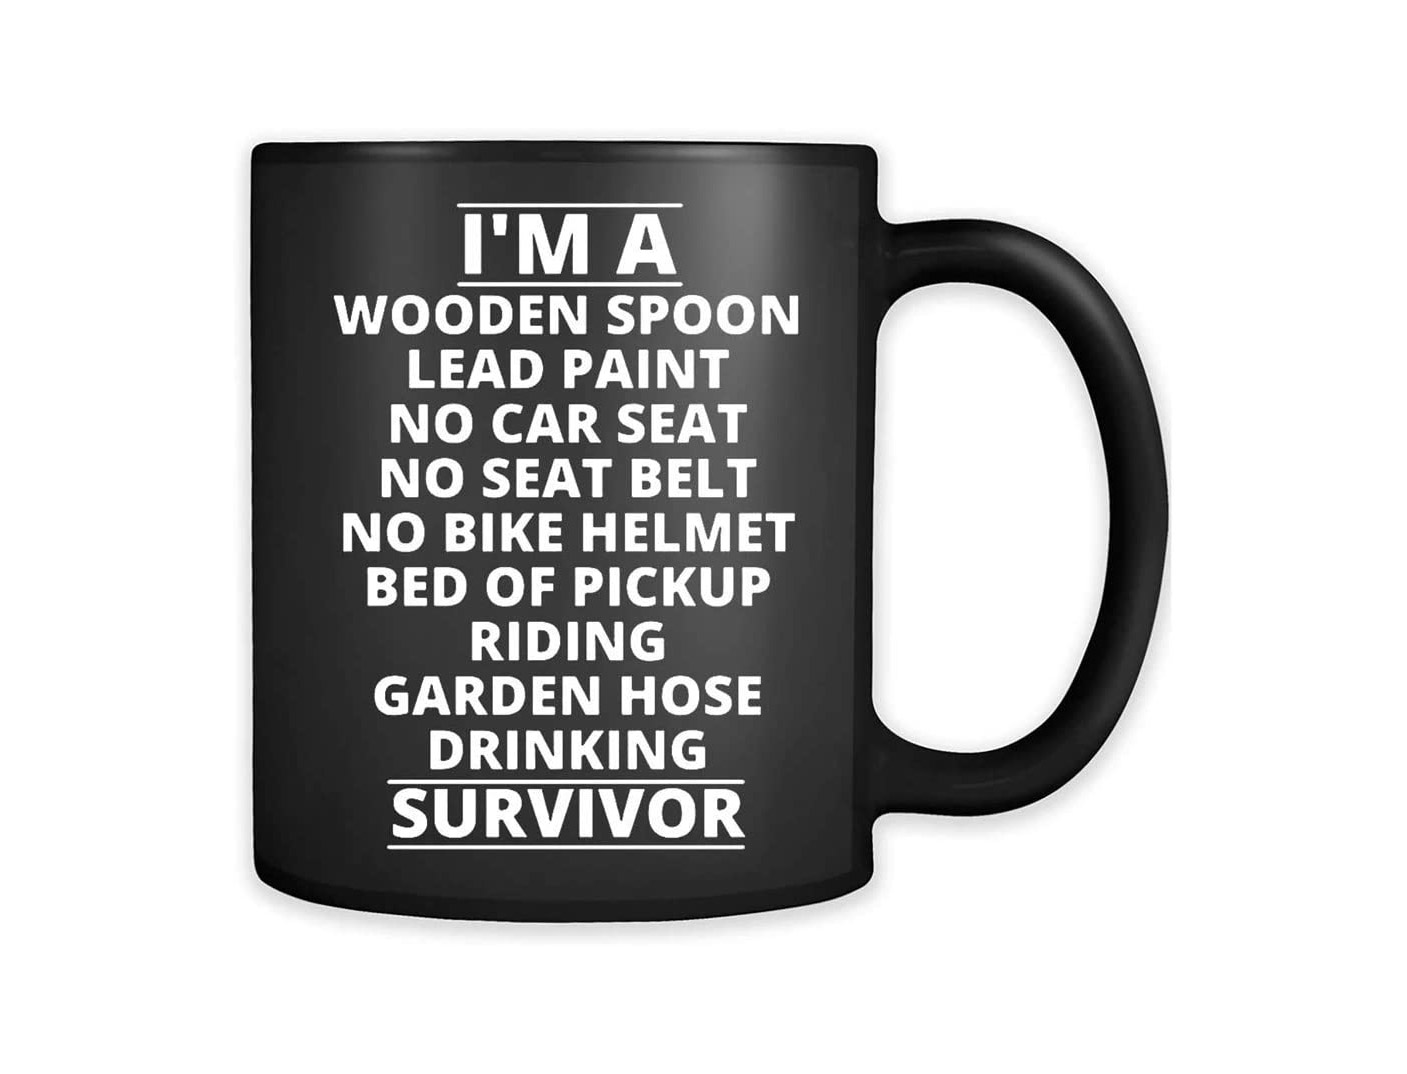 White-colored 'Wooden Spoon Lead Paint No Car Seat No Helmet Hose Drinking Survivor' printed on lack coffee mug